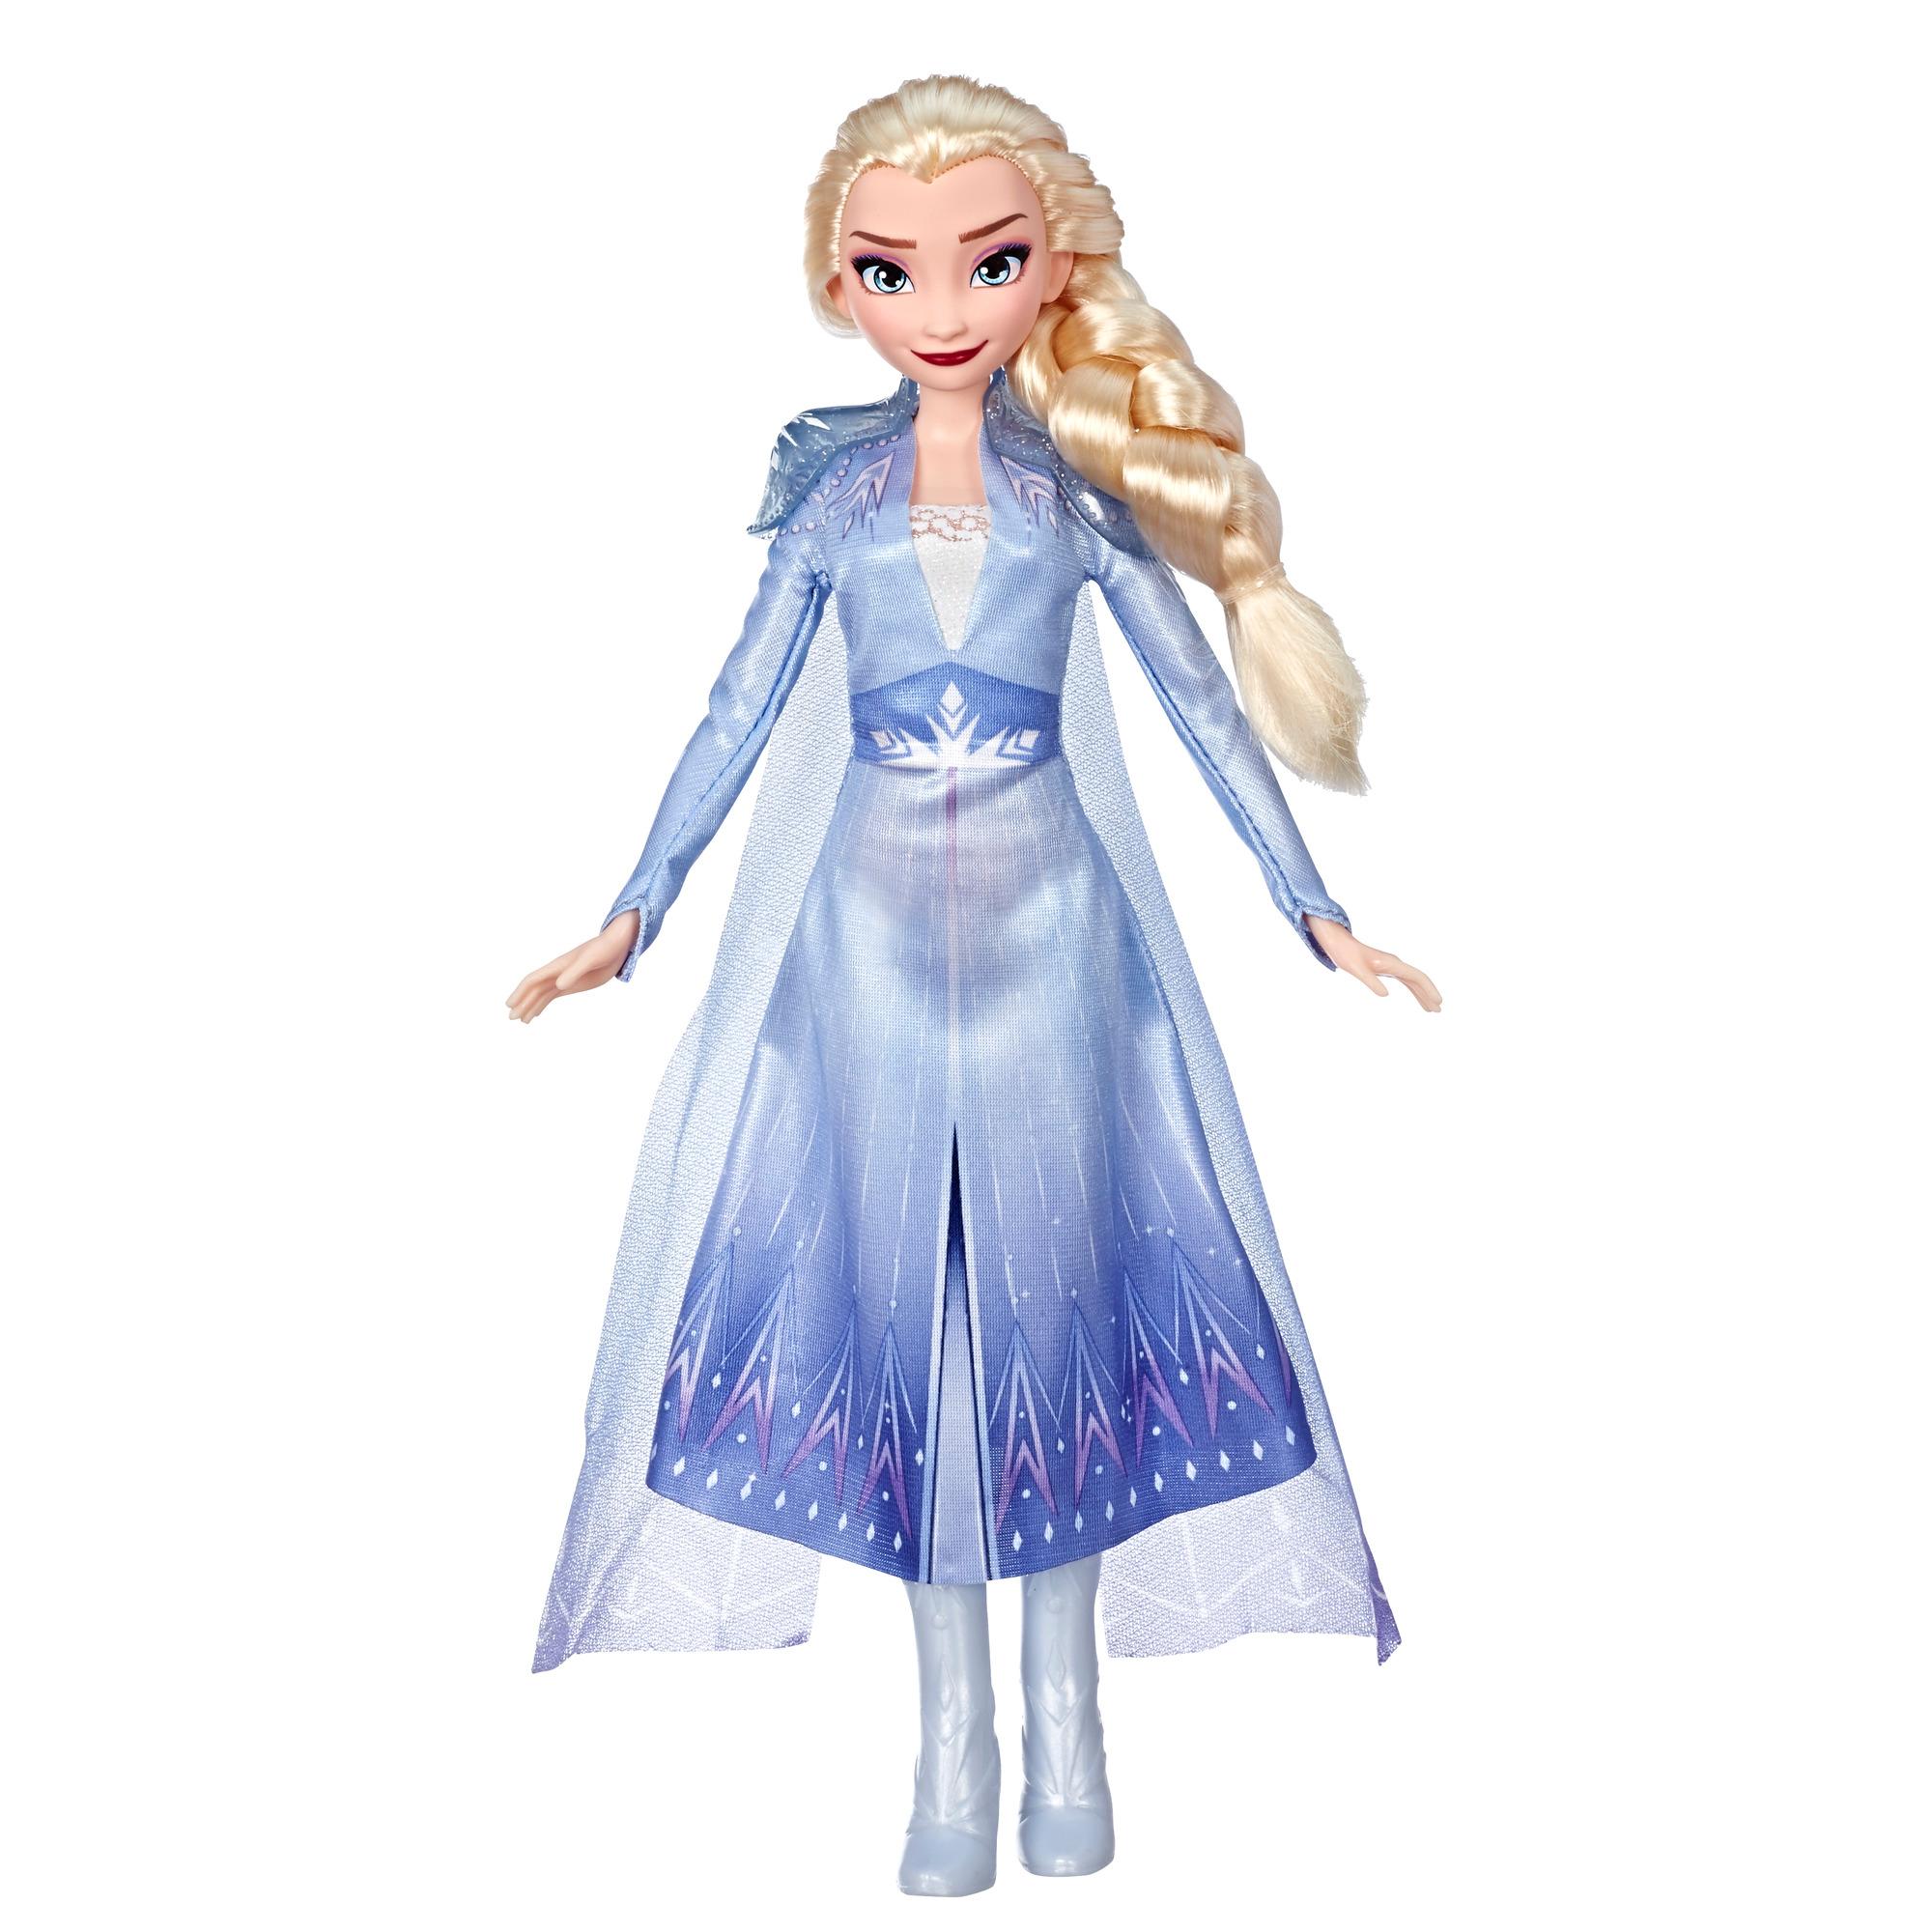 Hasbro Disney Frozen 2 Elsa Fashion Doll With Blue Outfit E5514 for sale online